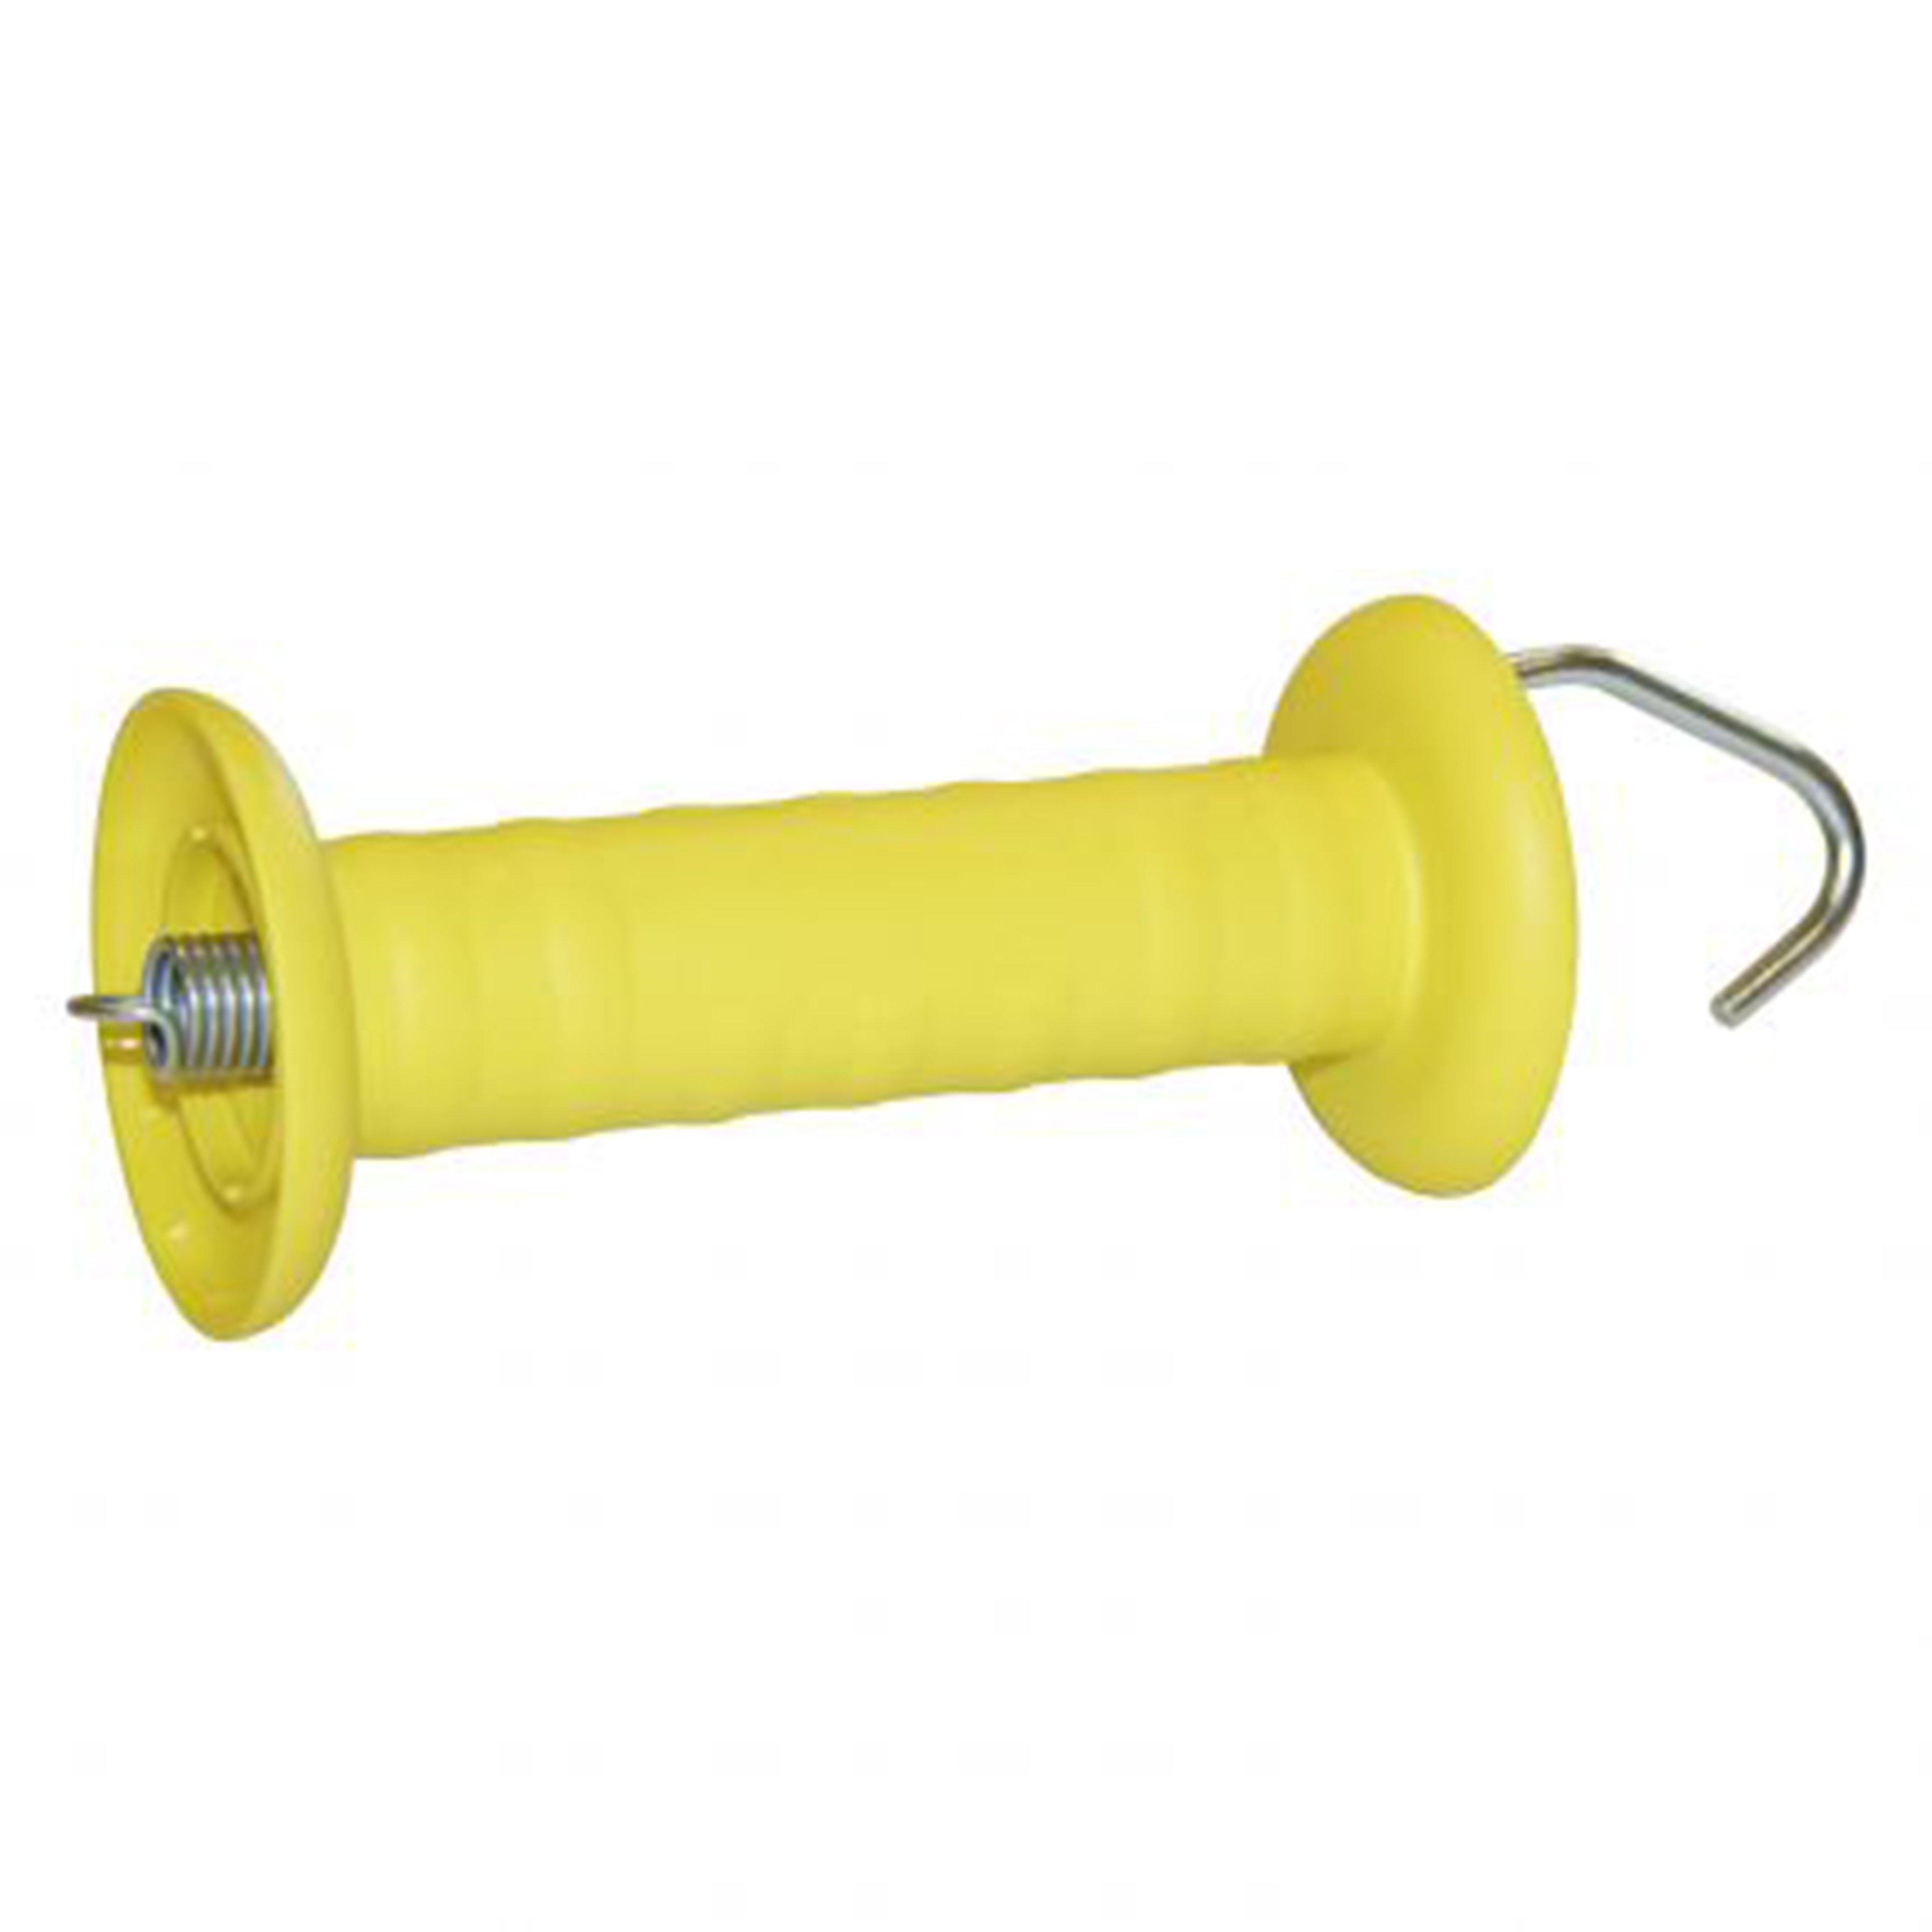 Electric Fencing Gate Handle Yellow